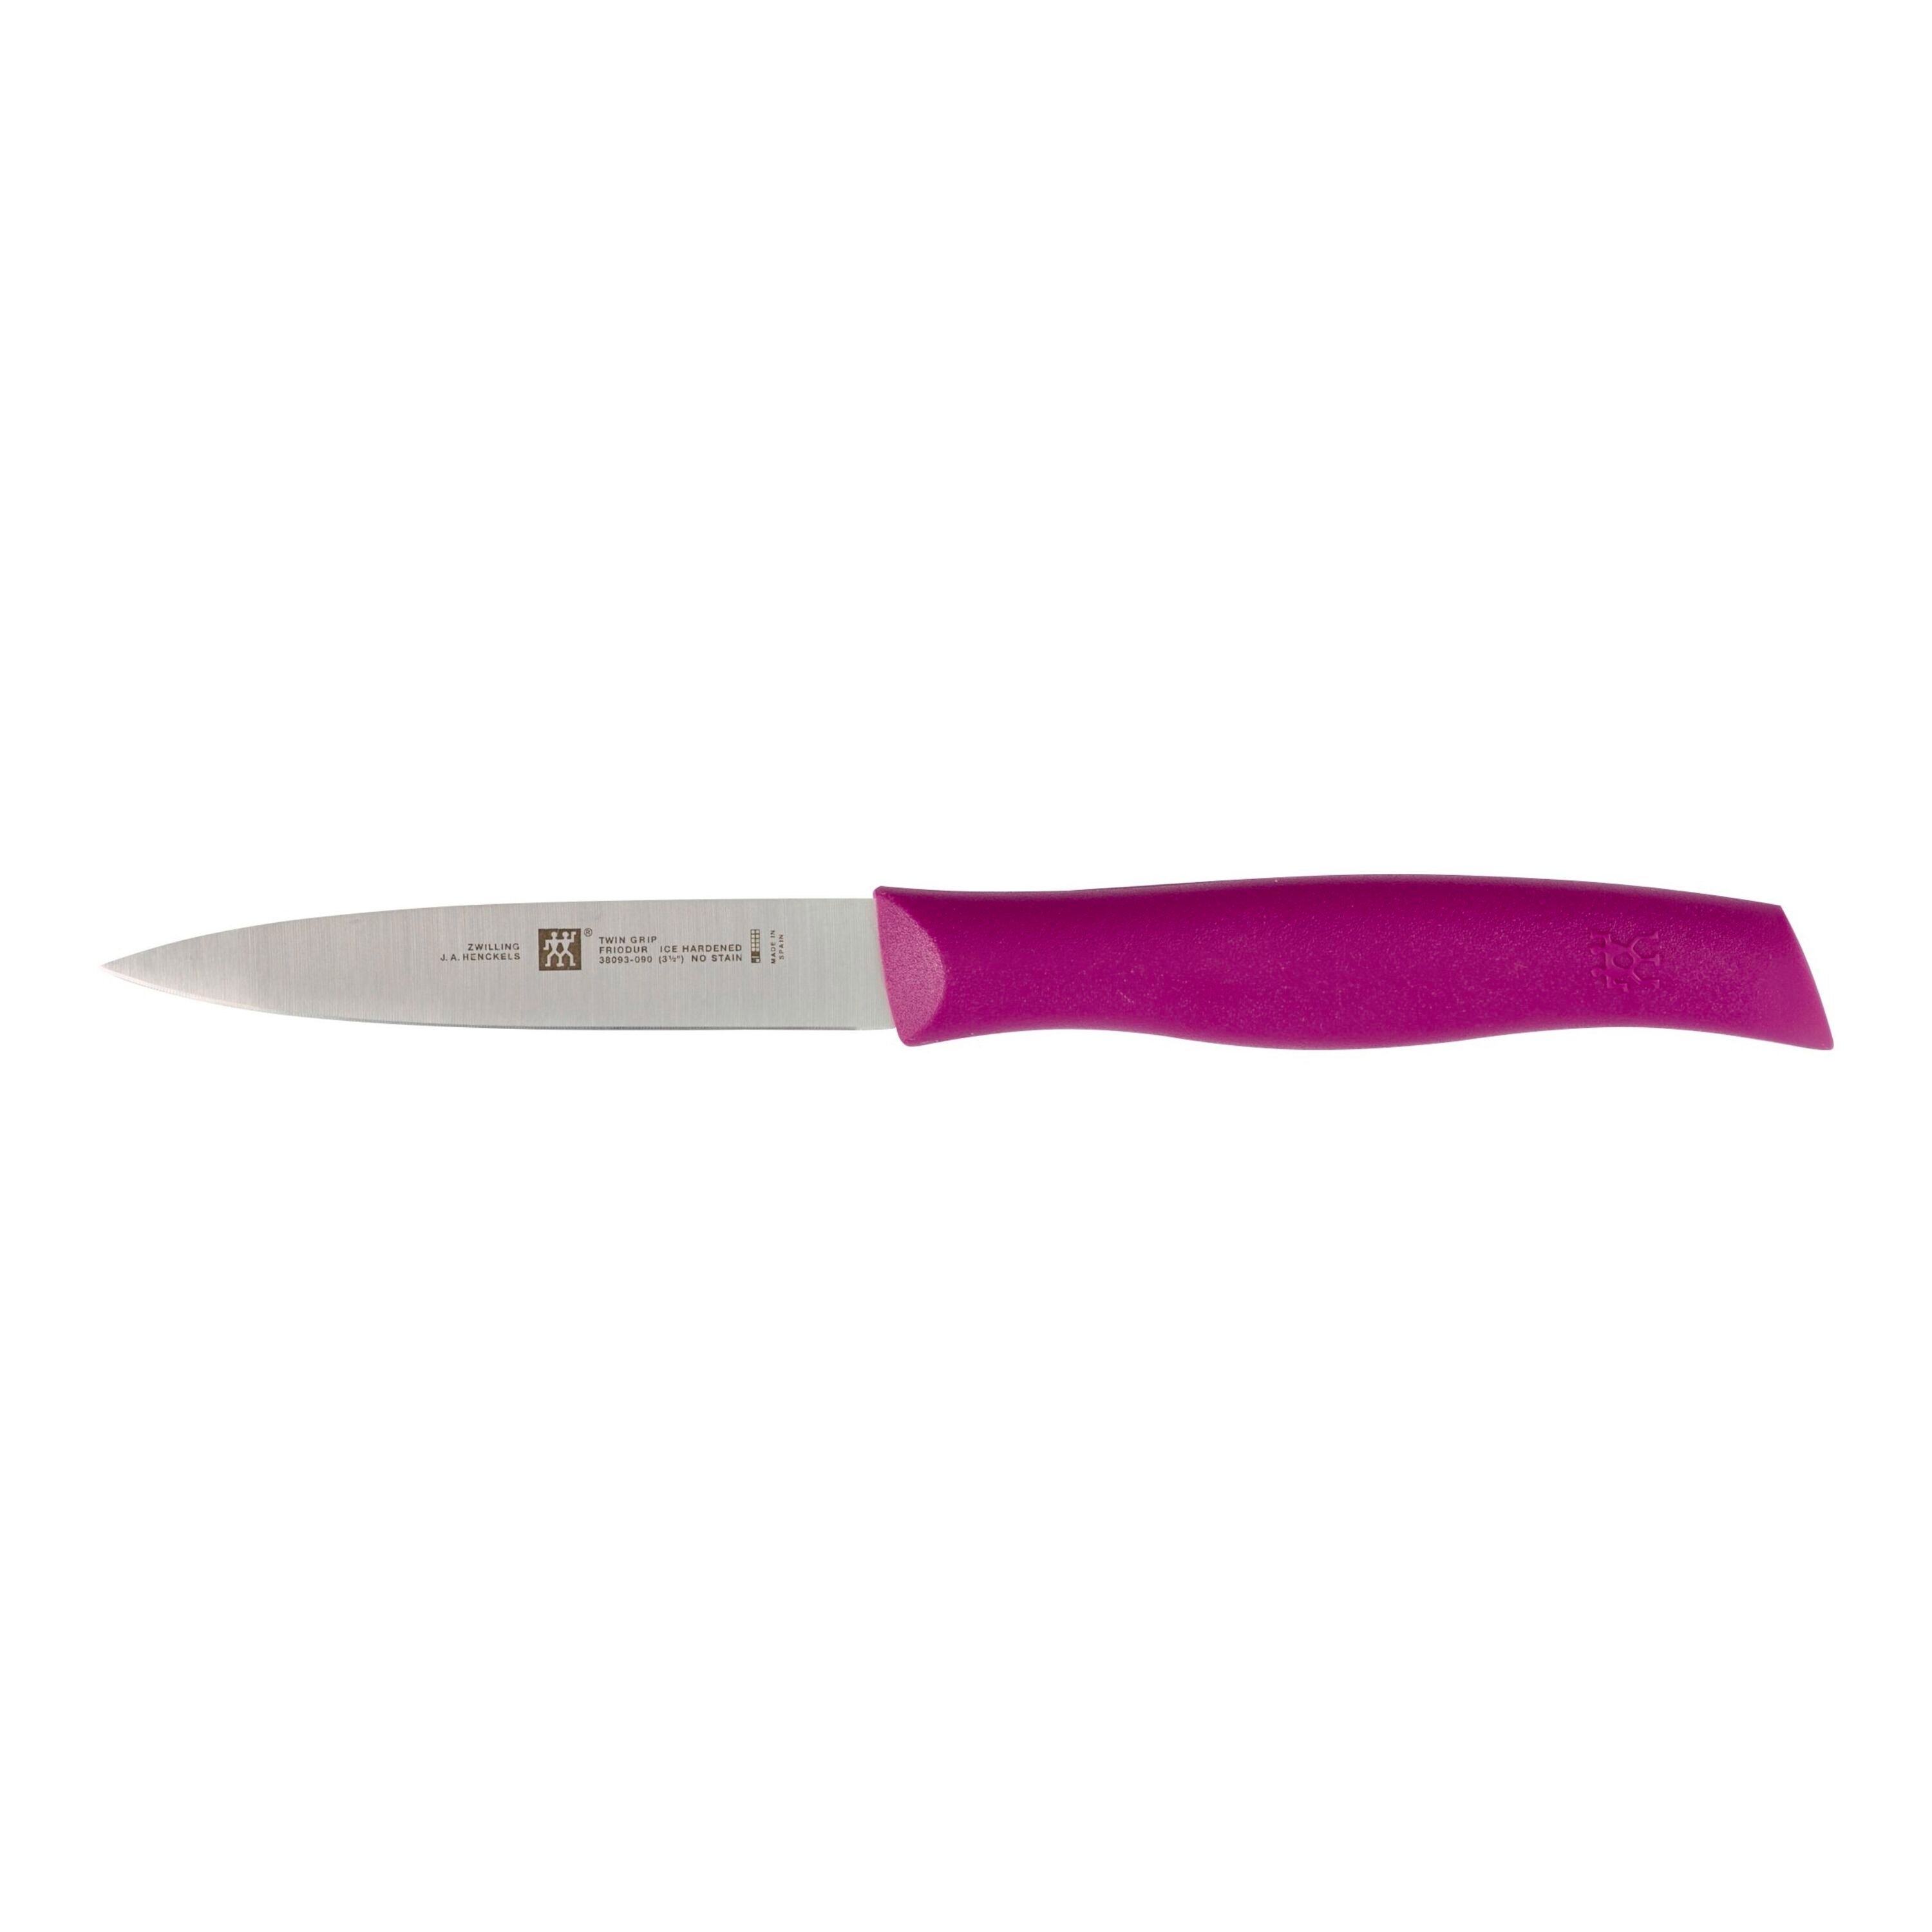 Zwilling J.A. Henckels Twin Grip 3.5-inch Paring Knife - Green